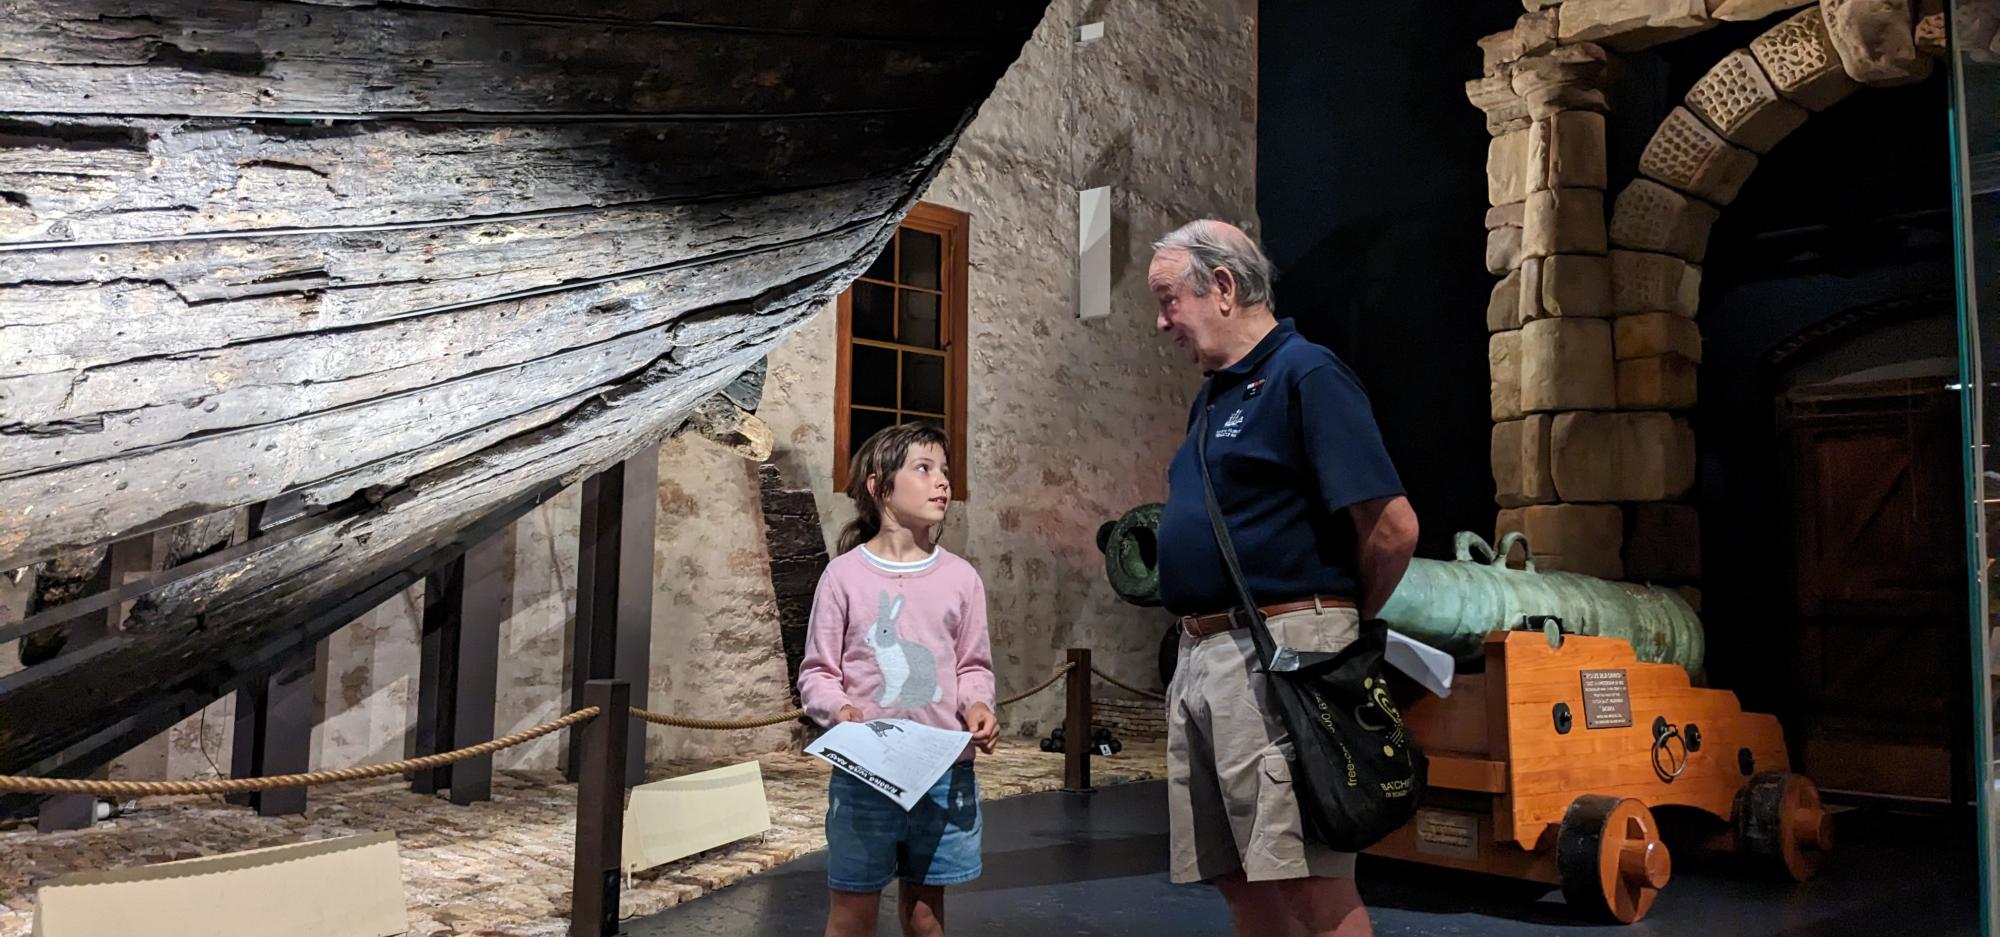 A mature male volunteer wearing a WA Museum badge stands in front of the hull of the Batavia shipwreck. A school-aged girl stands nearby, holding out a worksheet and discussing it with the volunteer.